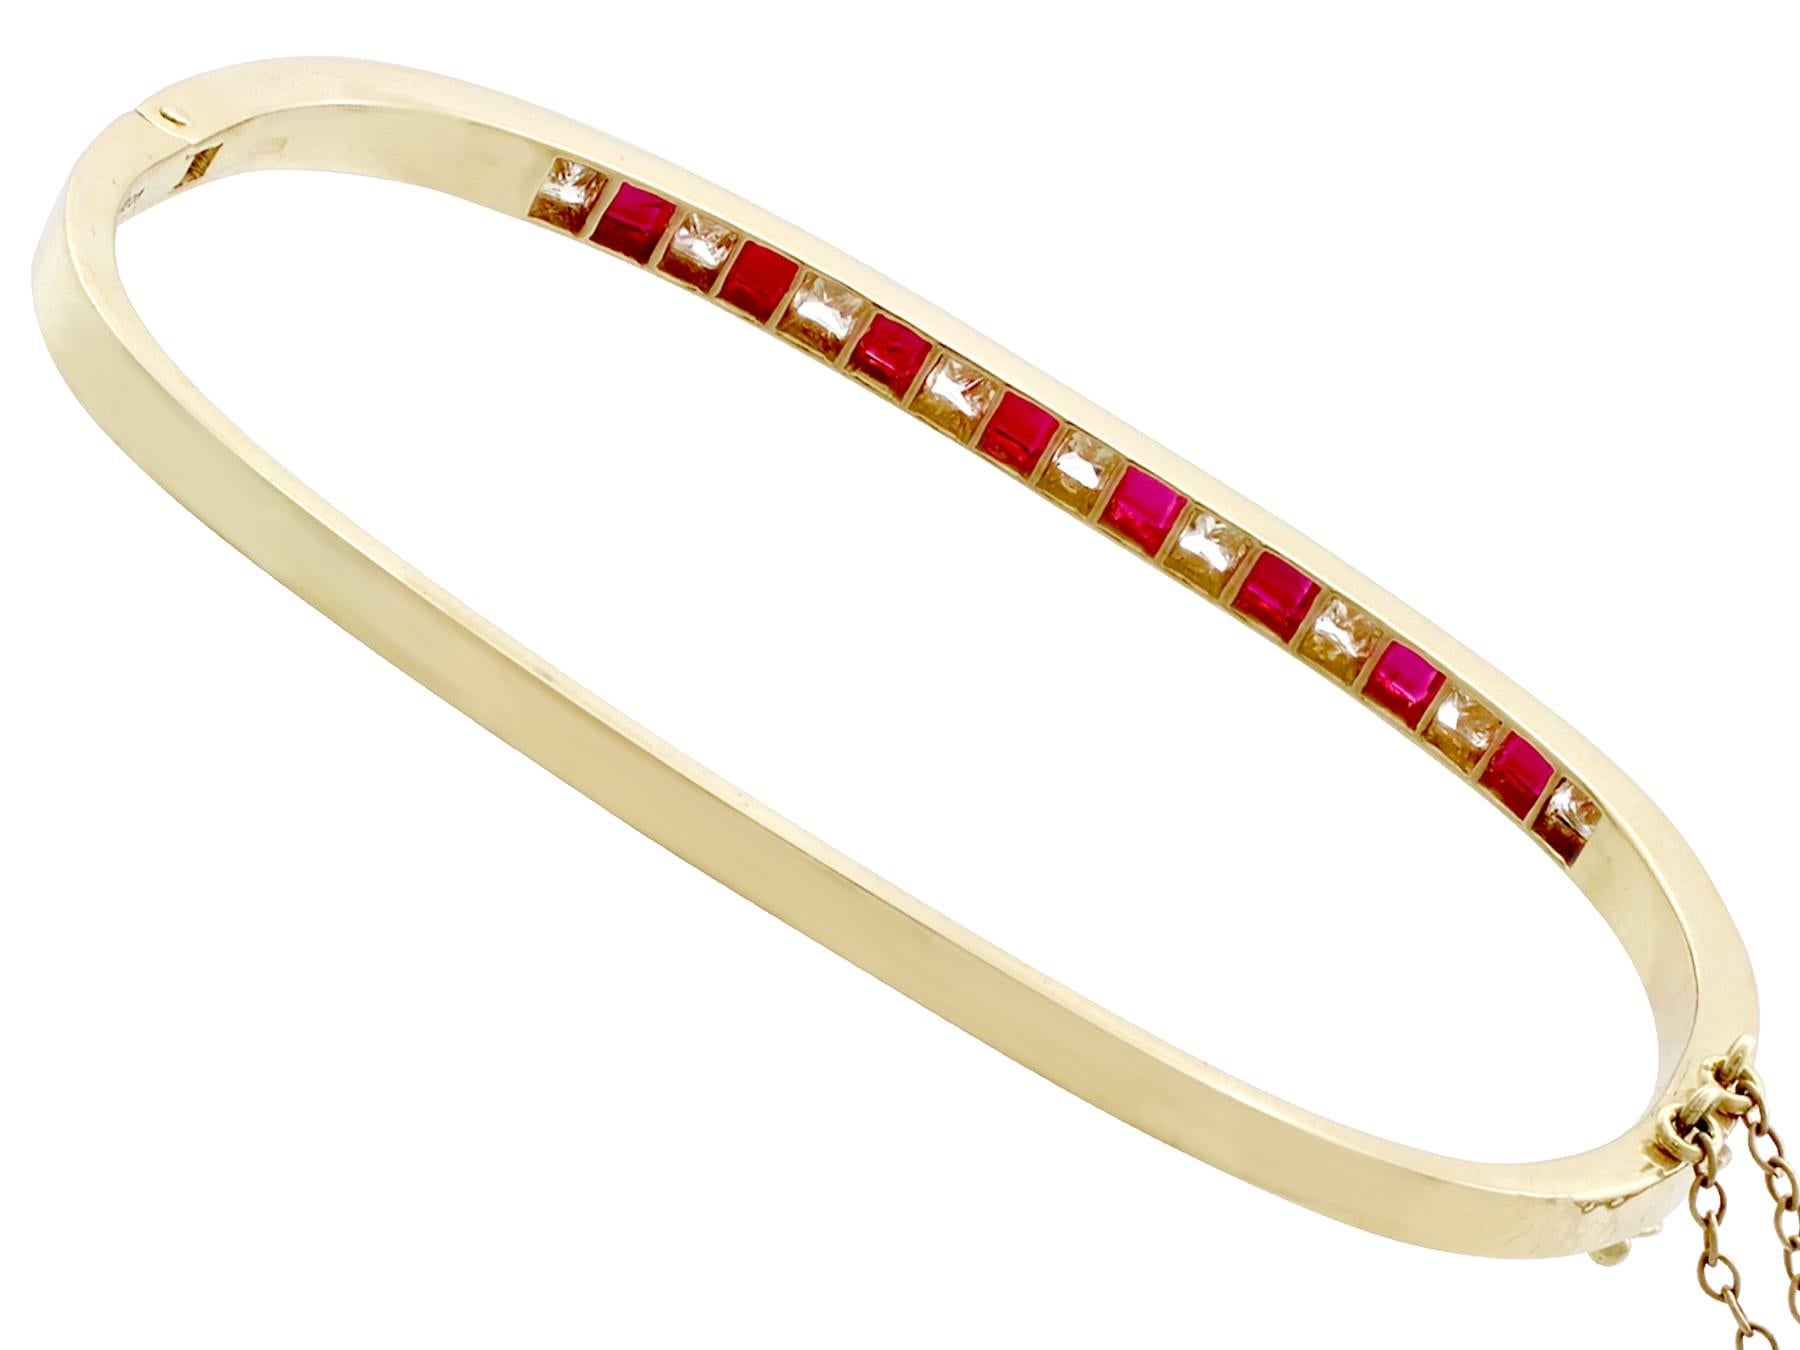 1.25 Carat Ruby 1.12 Carat Diamond Yellow Gold Bangle In Excellent Condition For Sale In Jesmond, Newcastle Upon Tyne